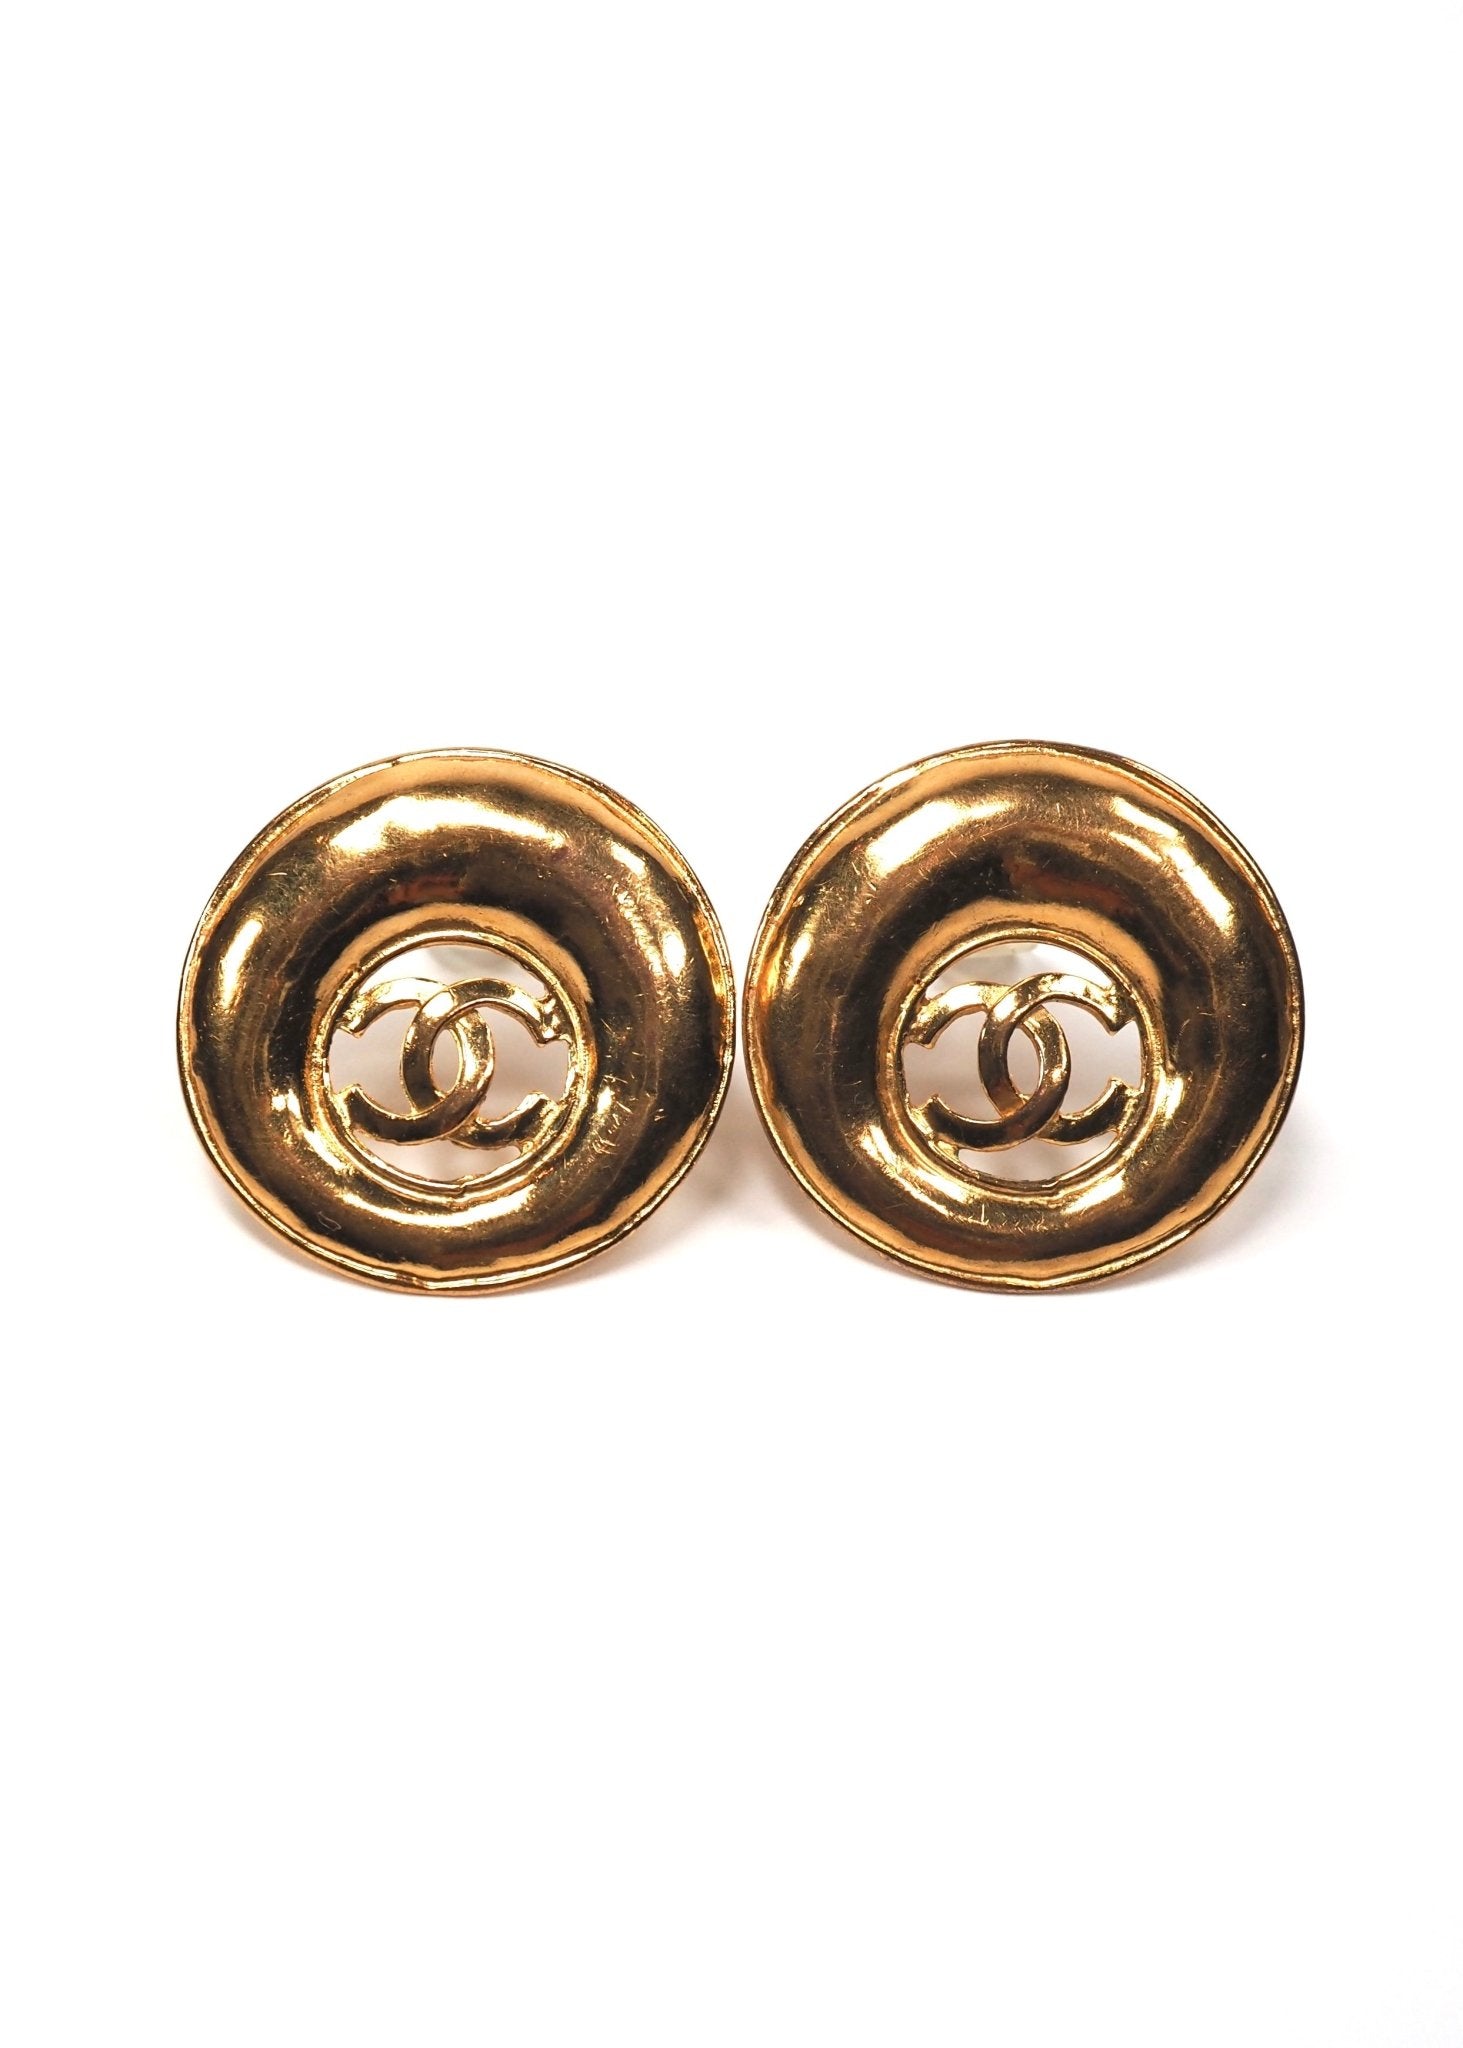 Chanel Vintage Gold Tone Button Earrings